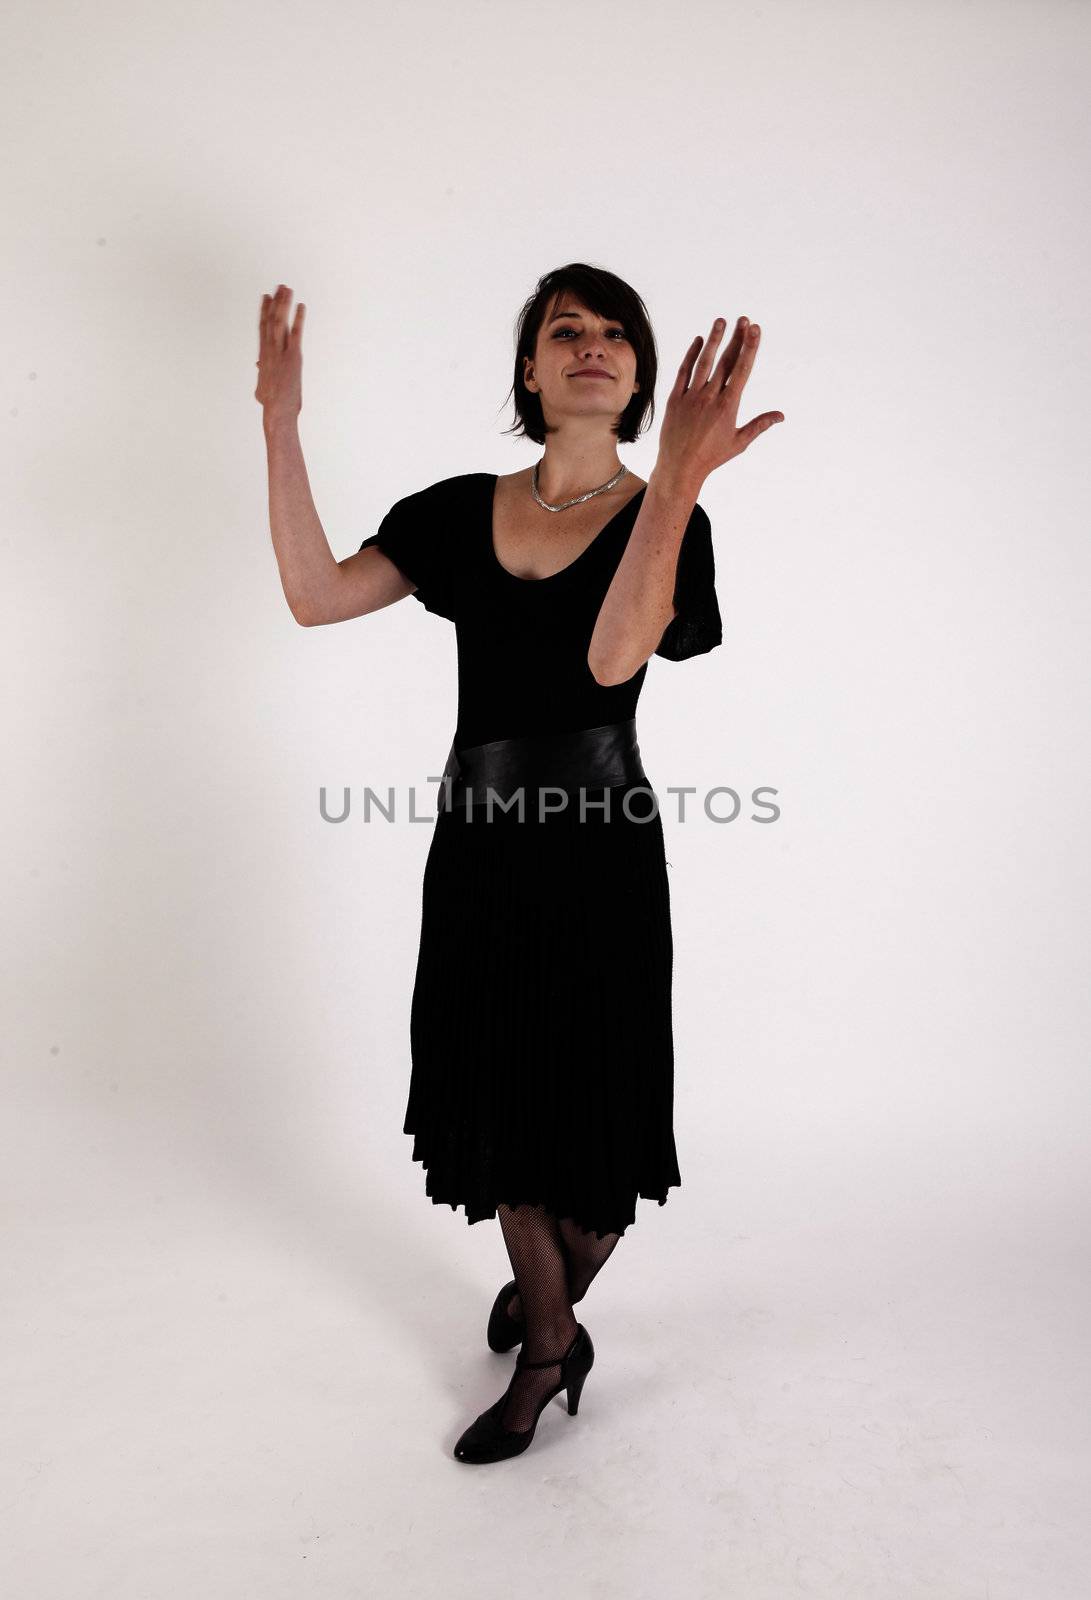 a young woman in strict black dress in studio looking like widow or nanny